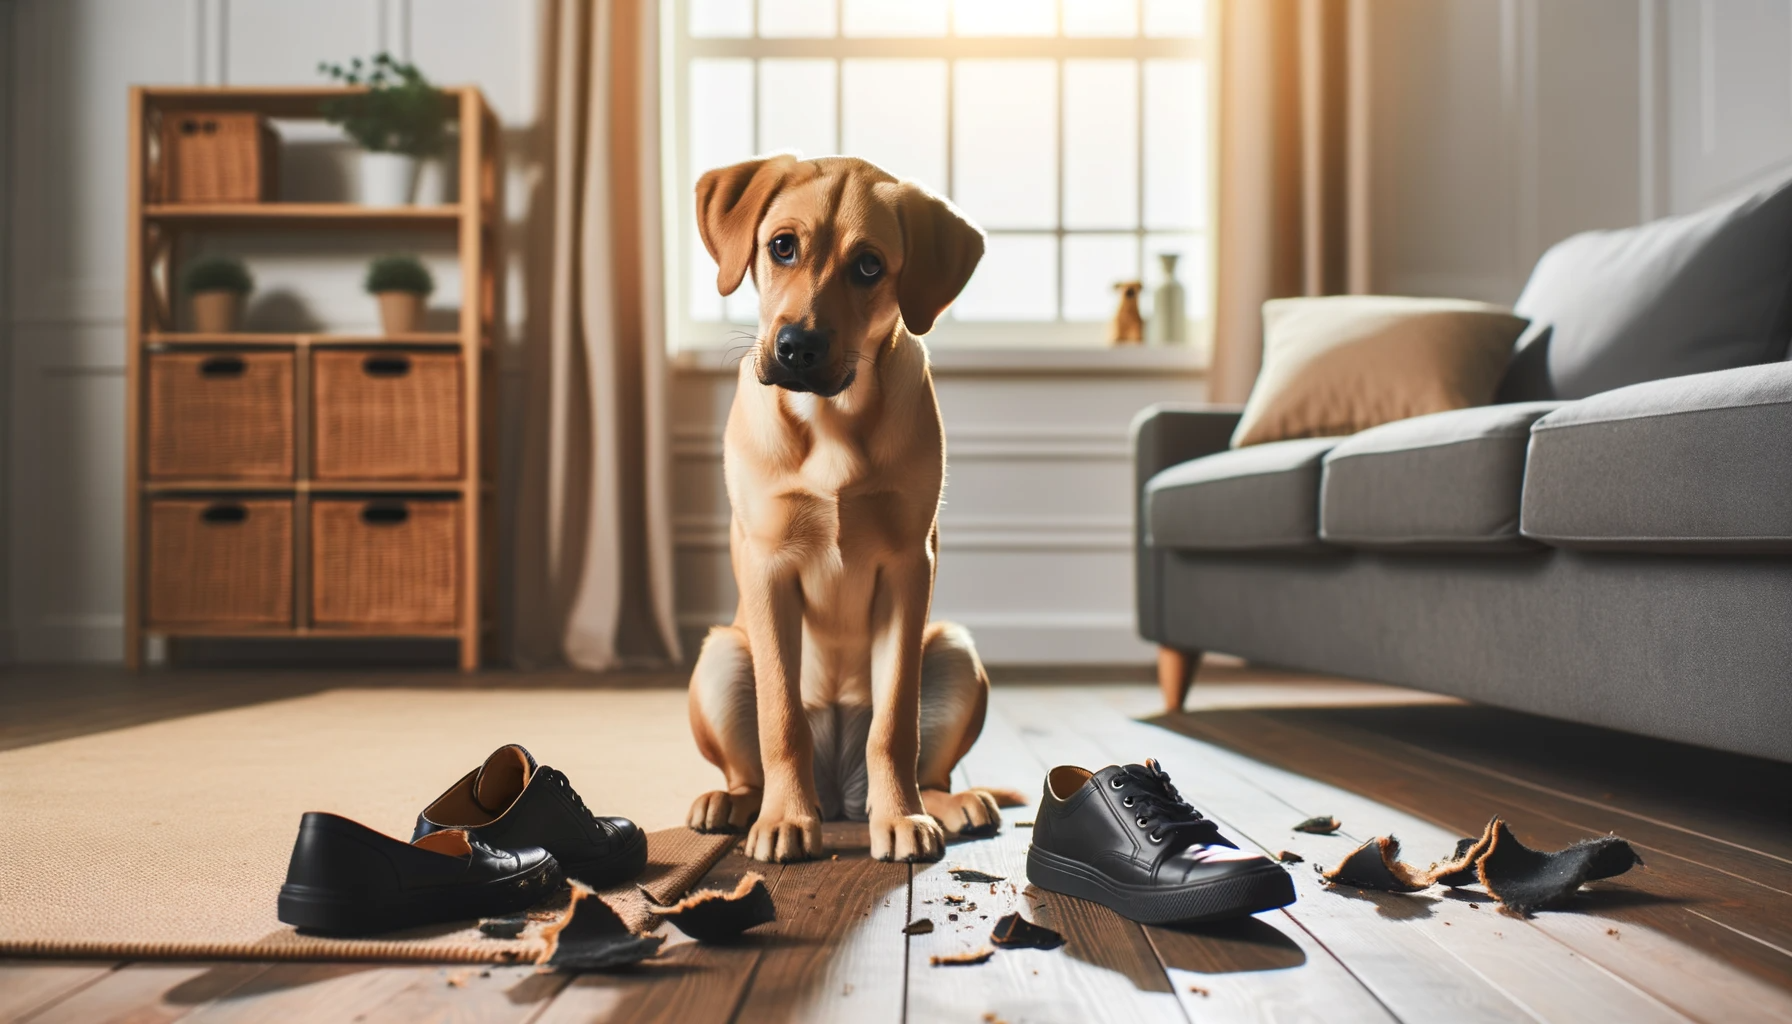 Labrador mixed with Rottweiler looking guilty next to a pair of chewed-up shoes, illustrating the importance of mental stimulation and exercise.